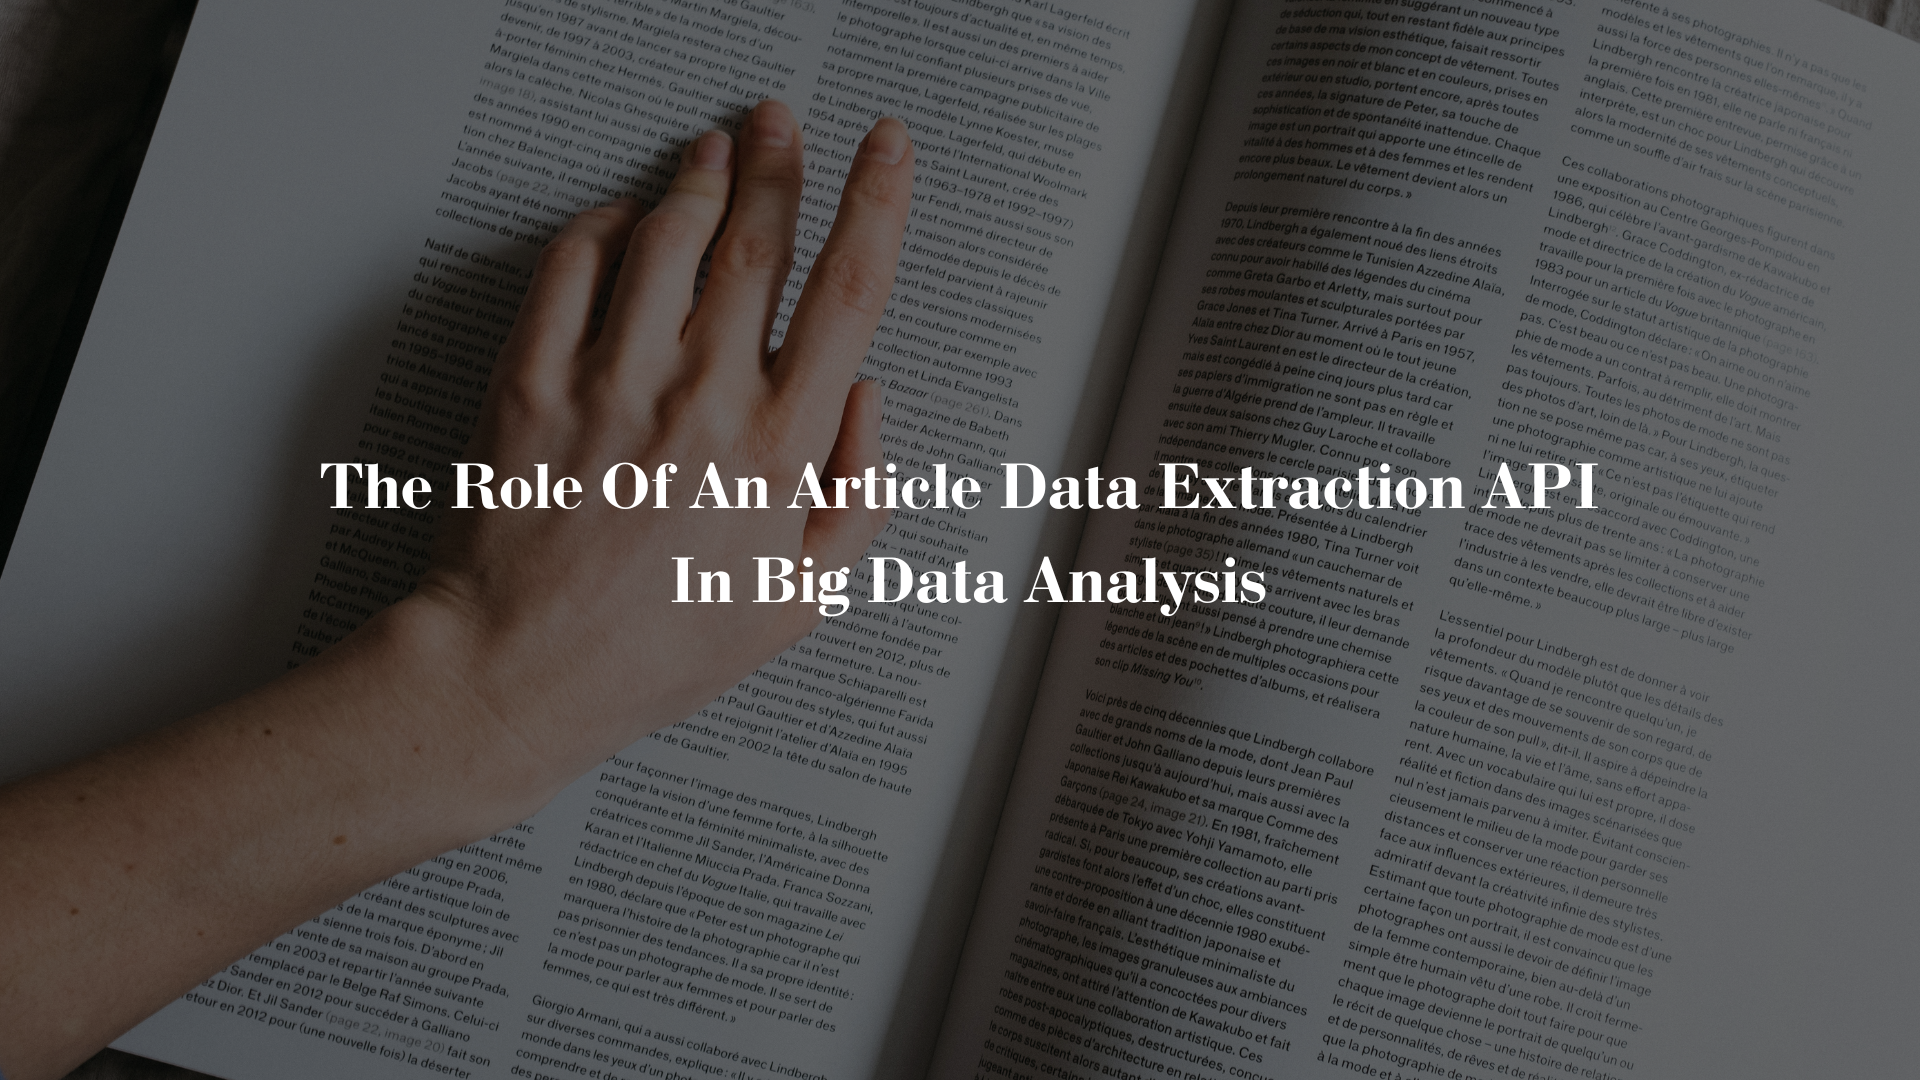 The Role Of An Article Data Extraction API In Big Data Analysis